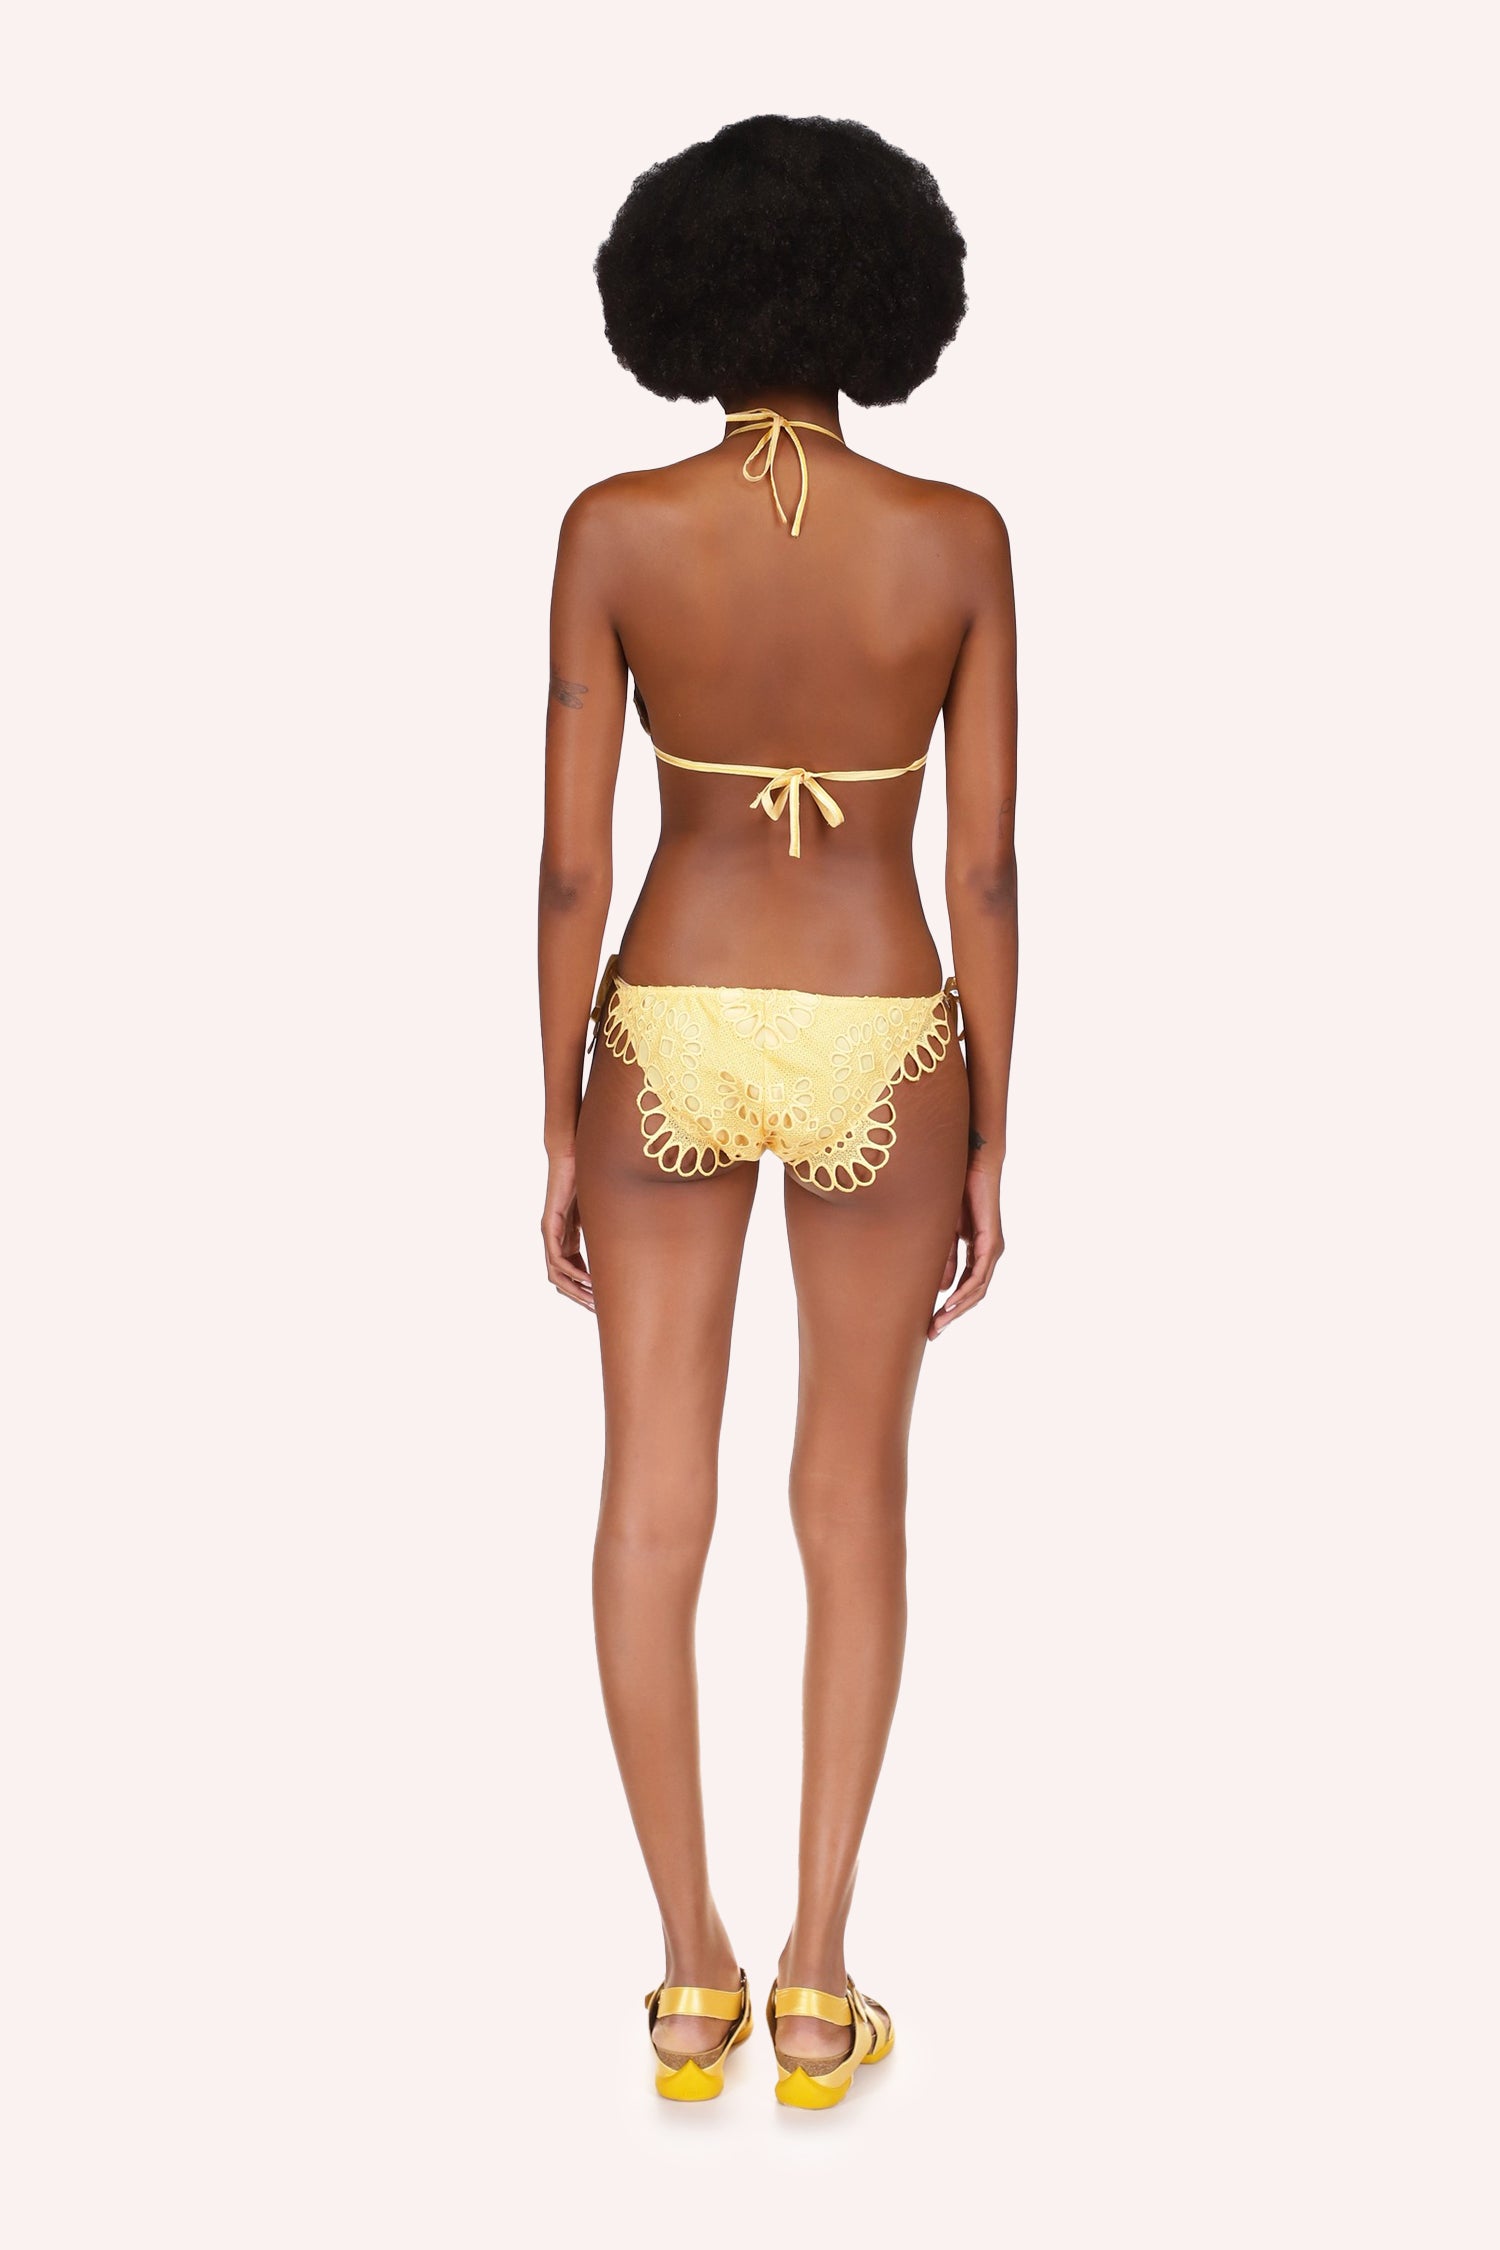 The Panty hems are highlighted with eyelet design, the fabric is also an eyelet yellow design